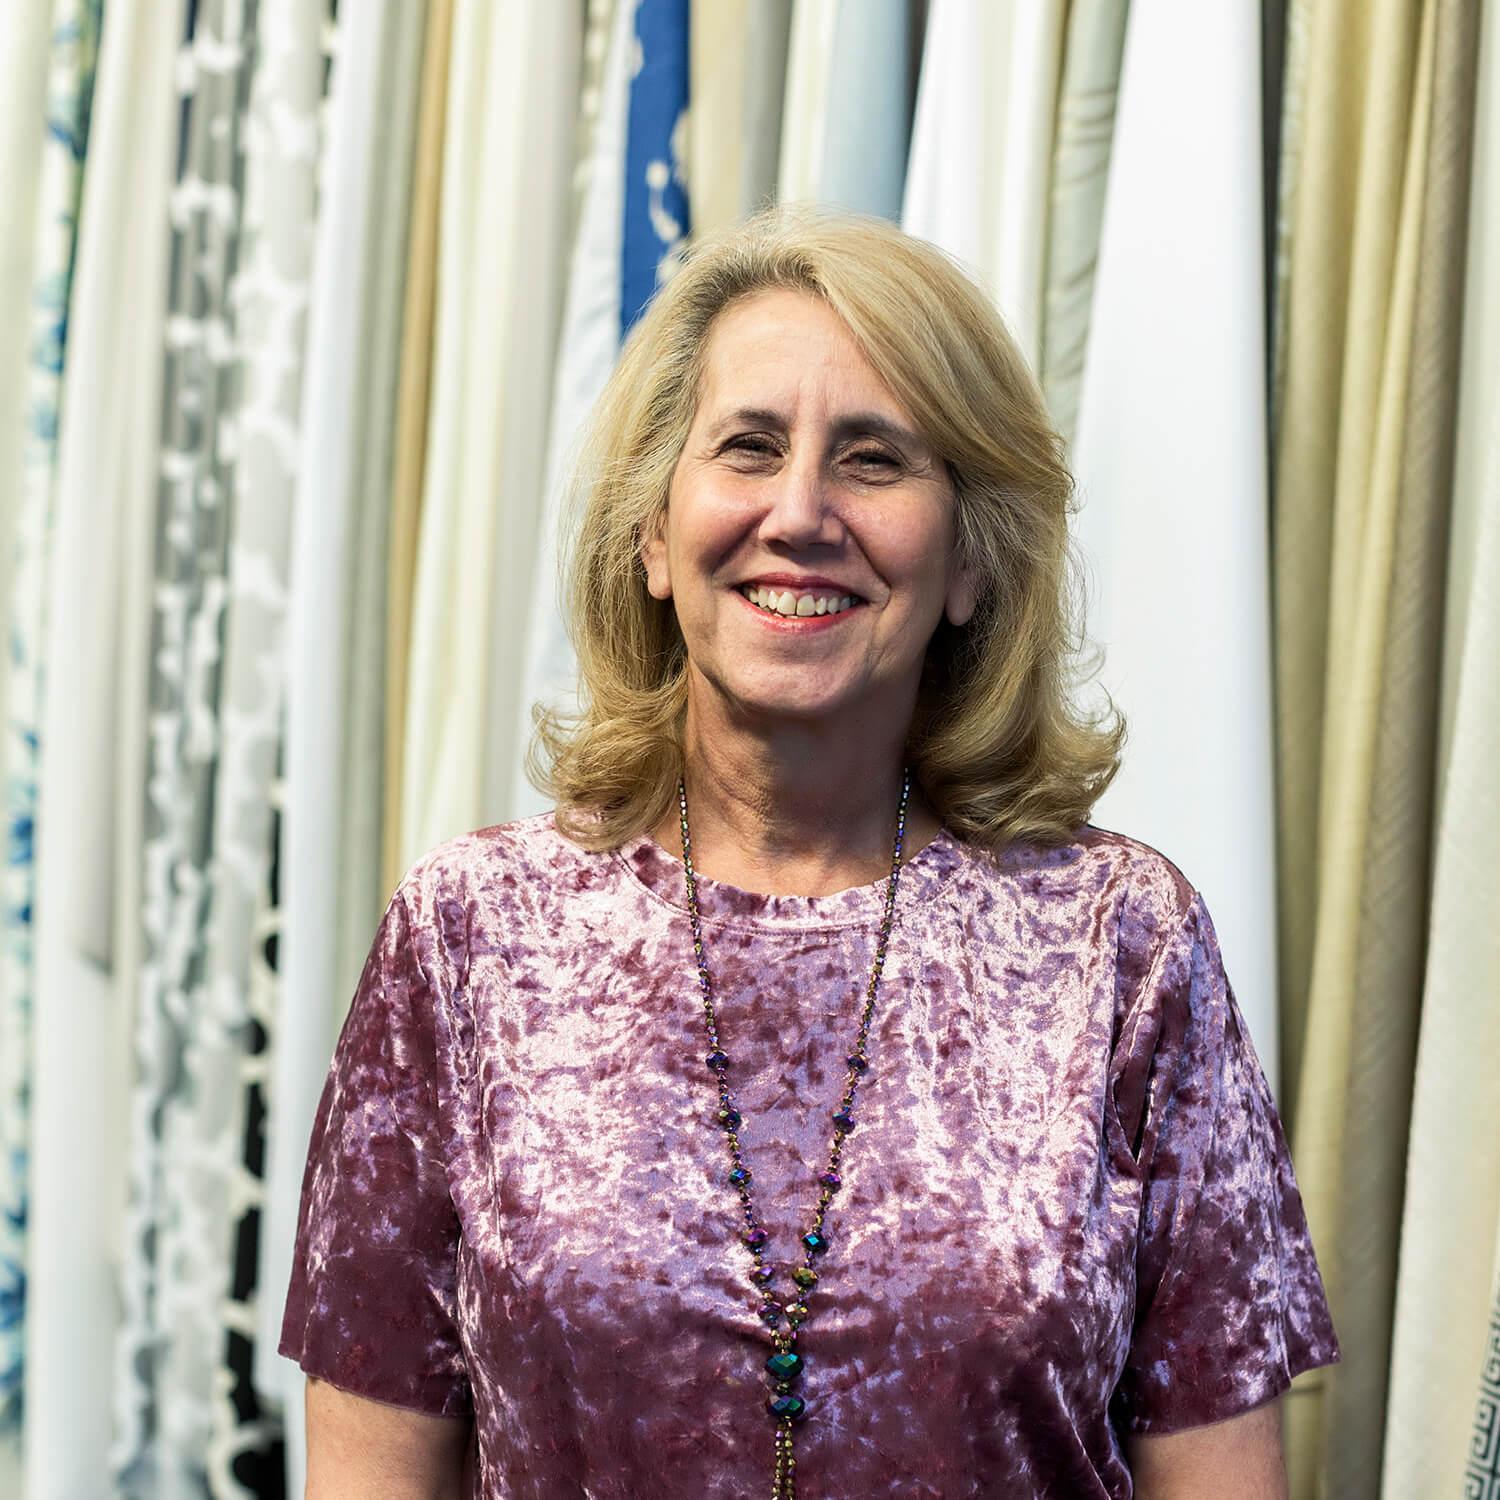 A woman smiles in front of a wall of drapery fabric samples